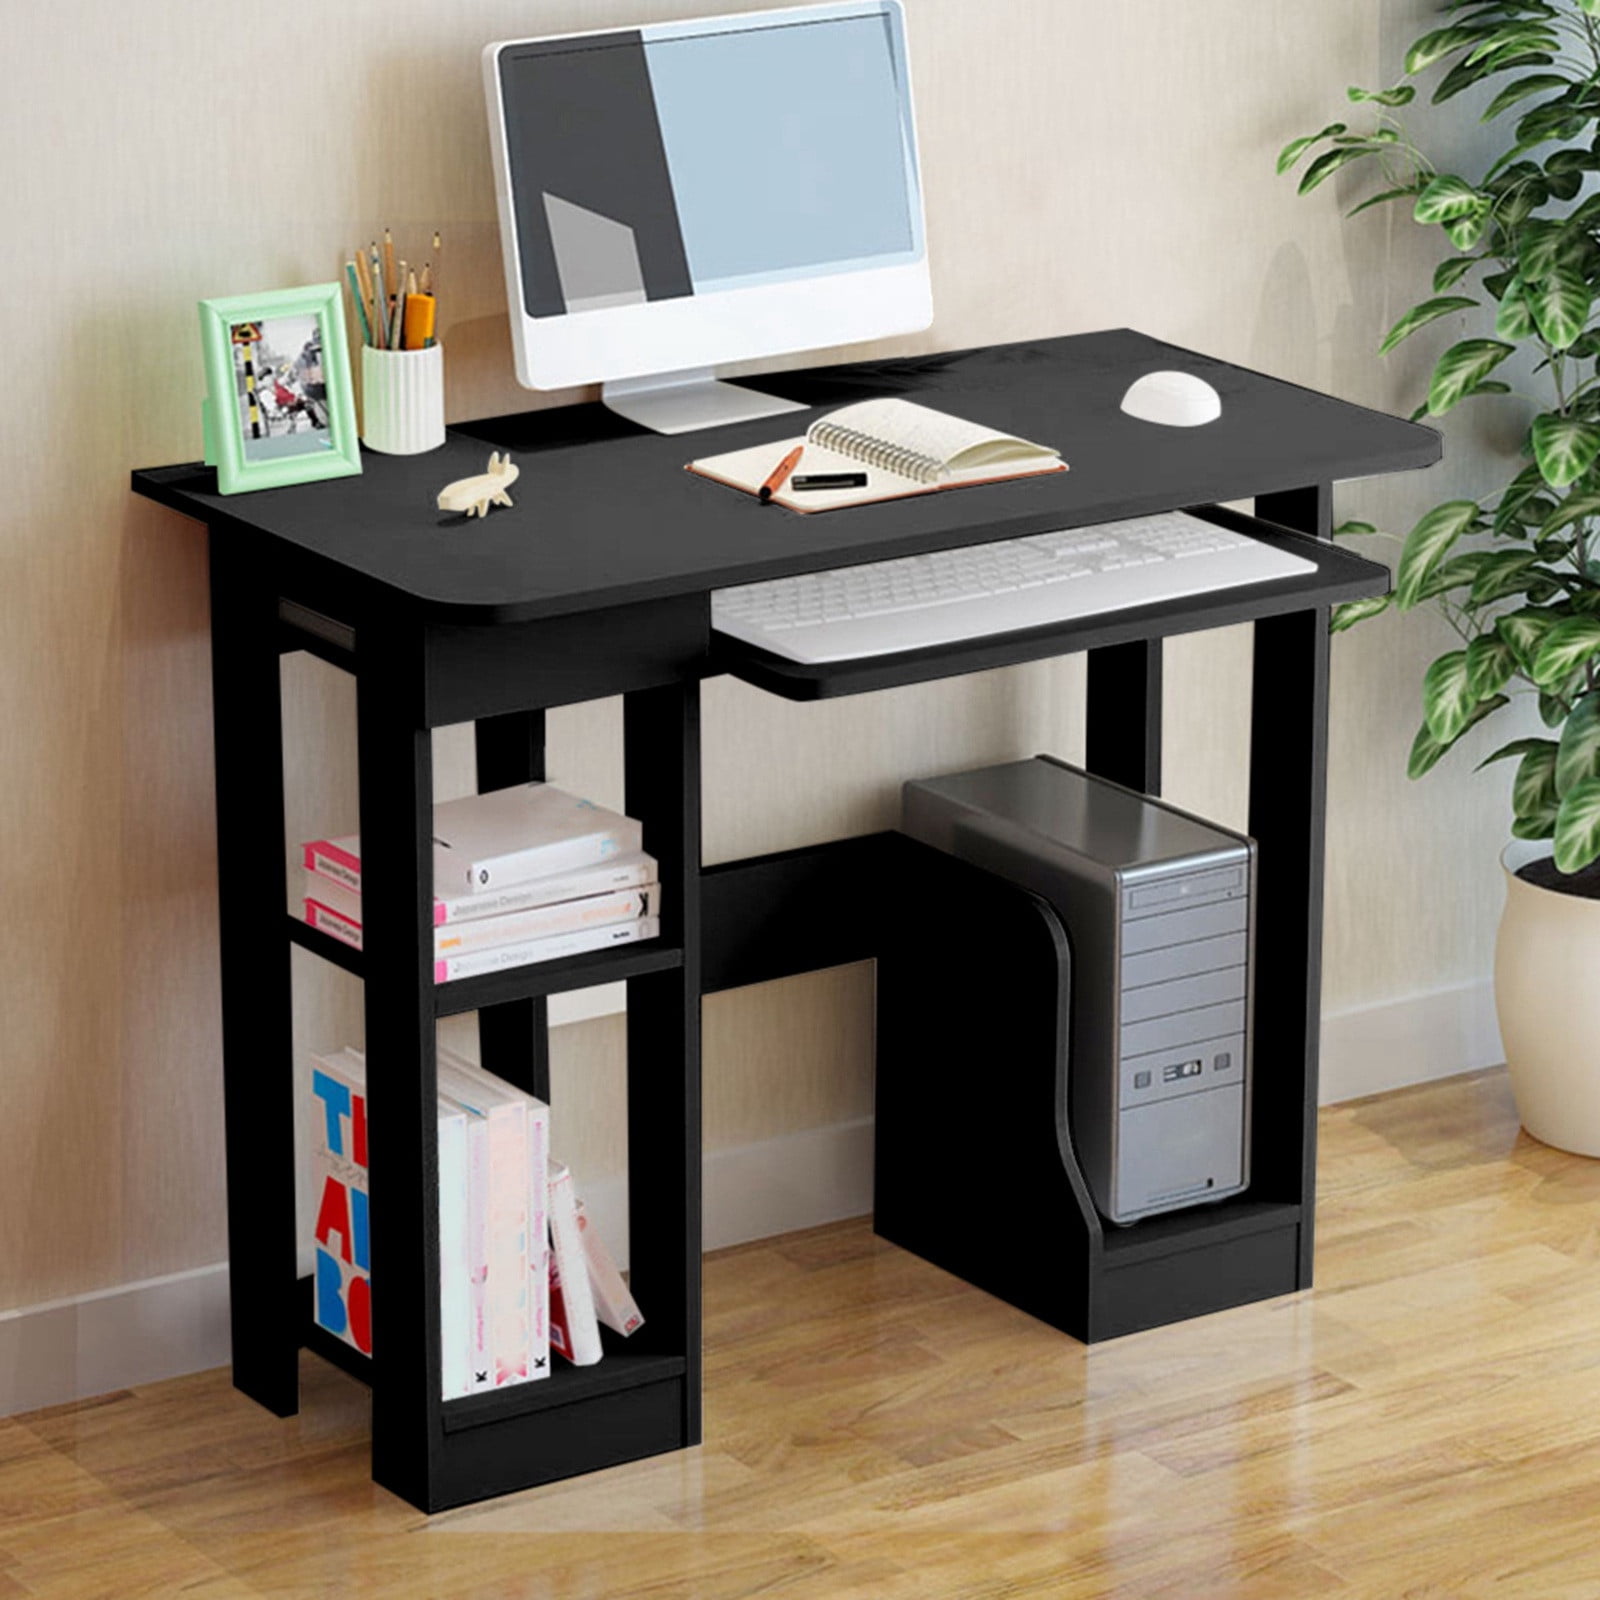 Details about   55"Study Student Computer Desk Wood PC Laptop Table Sturdy Home Office Furniture 